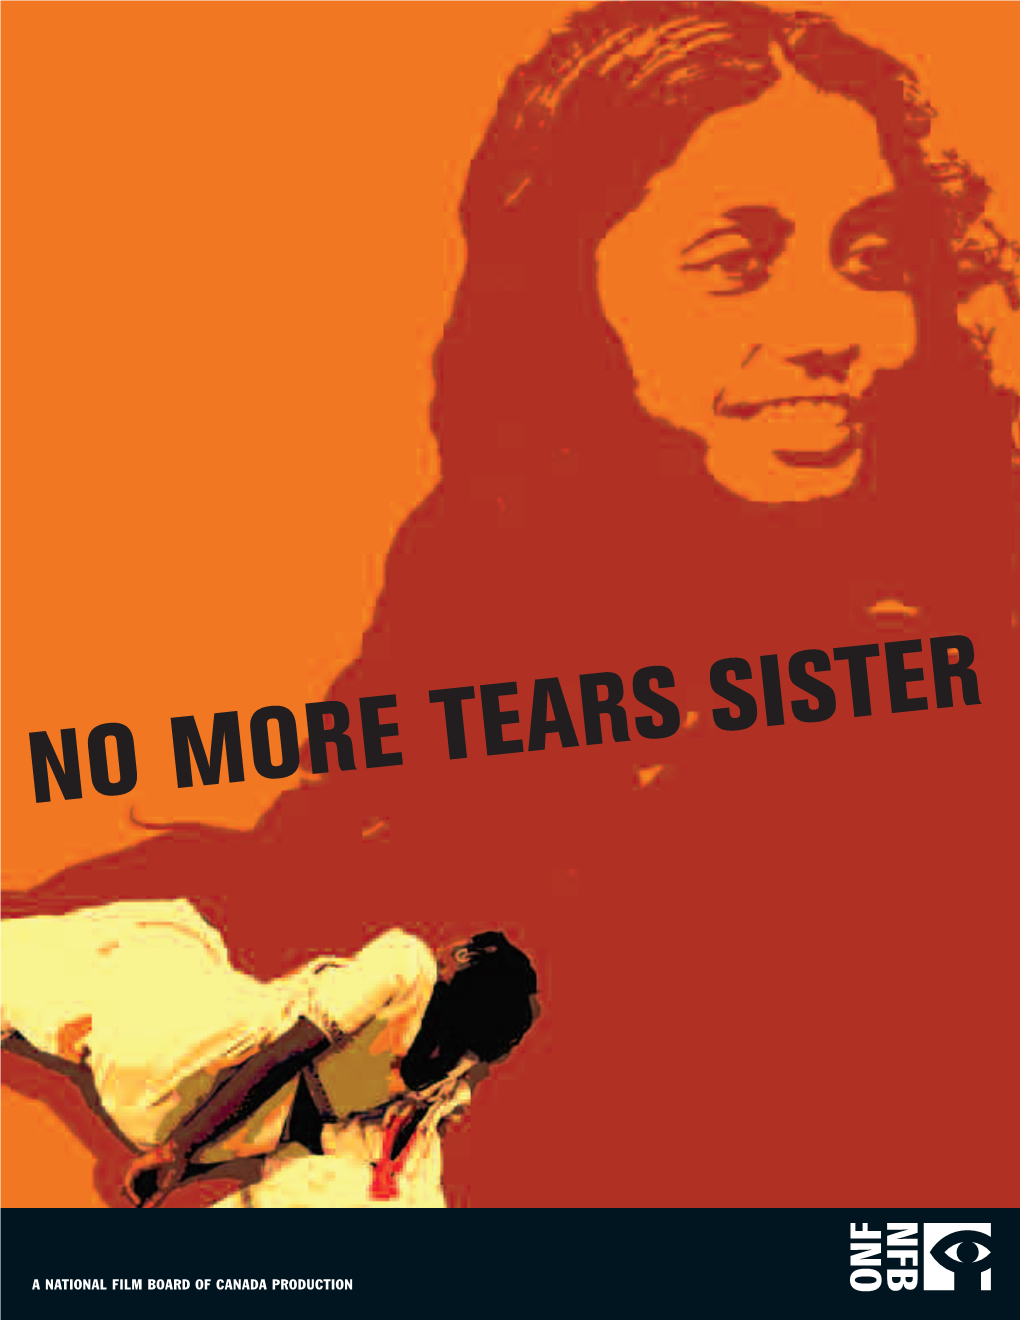 No More Tears Sister Helene Klodawsky Has Been Writing and Directing Social, Explores the Price of Truth in Times of War